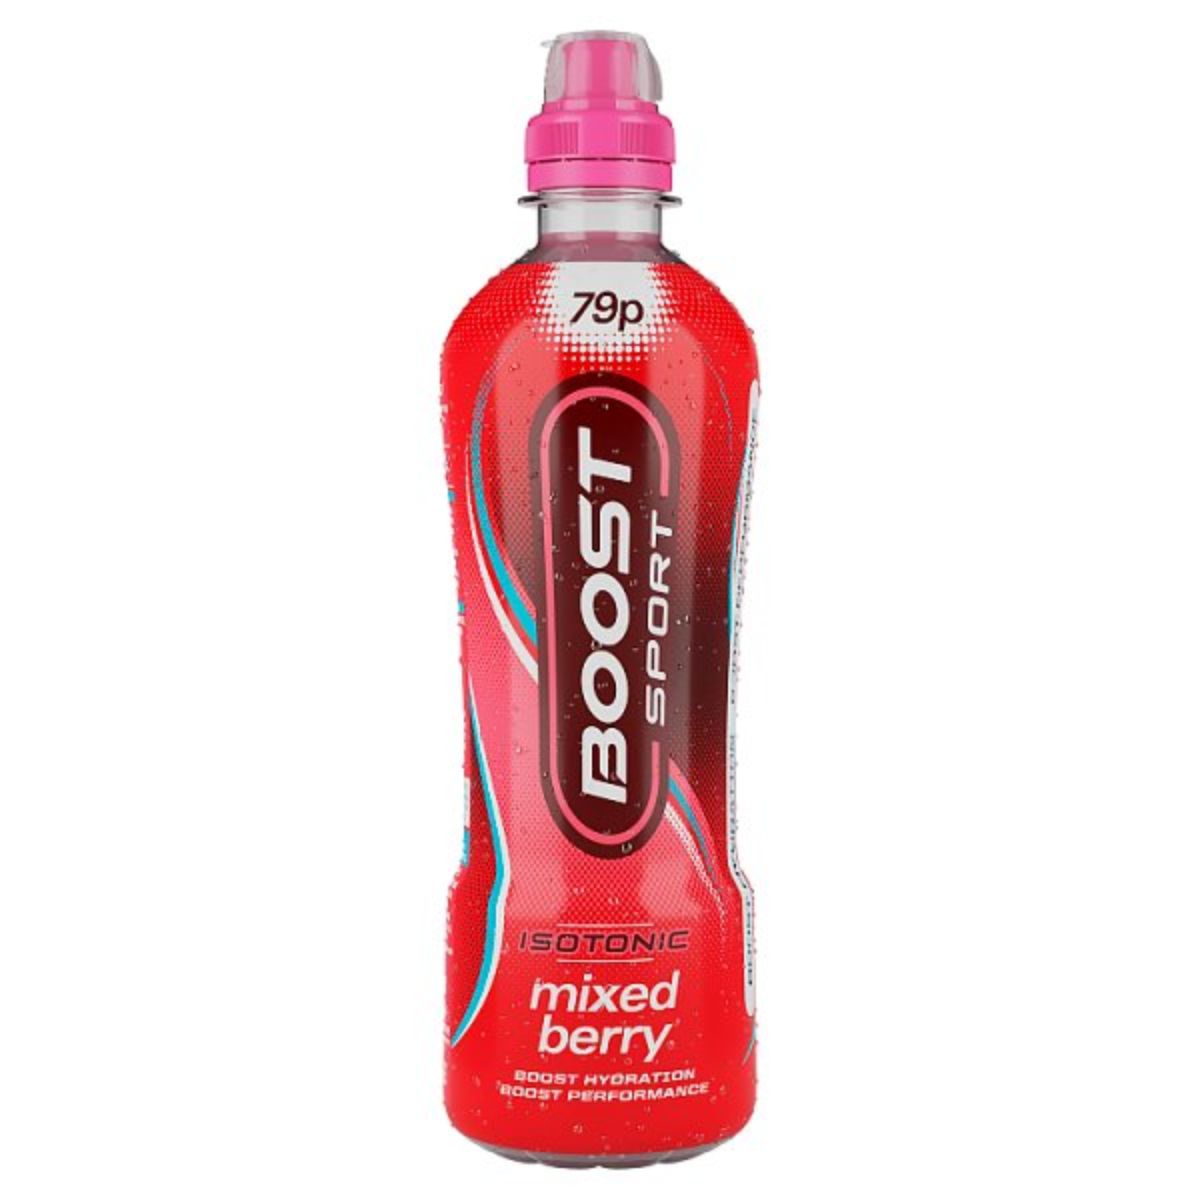 A bottle of Boost - Sport Isotonic Mixed Berry - 500ml on a white background.